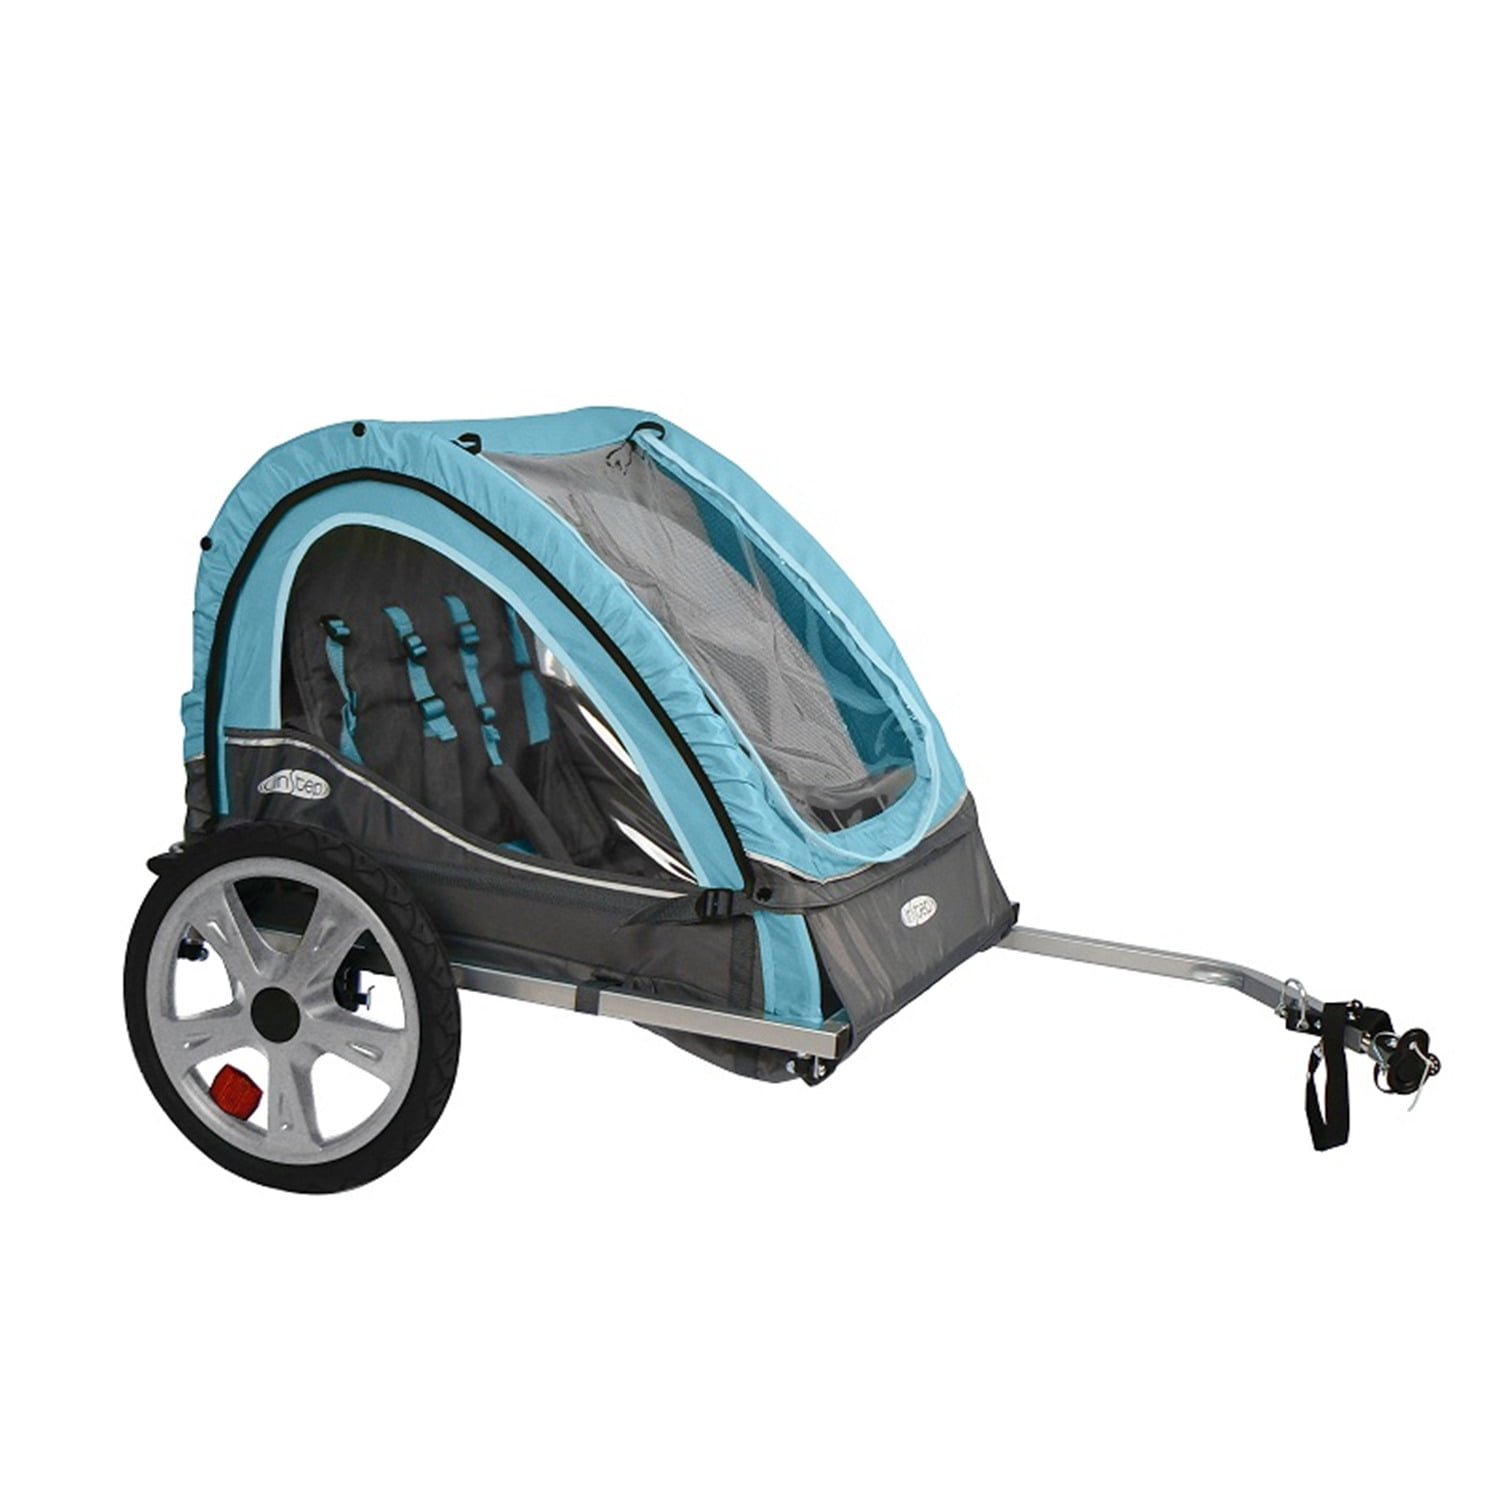 Tenive 2 in 1 Double Child Bicycle Trailer 4 Color Choice